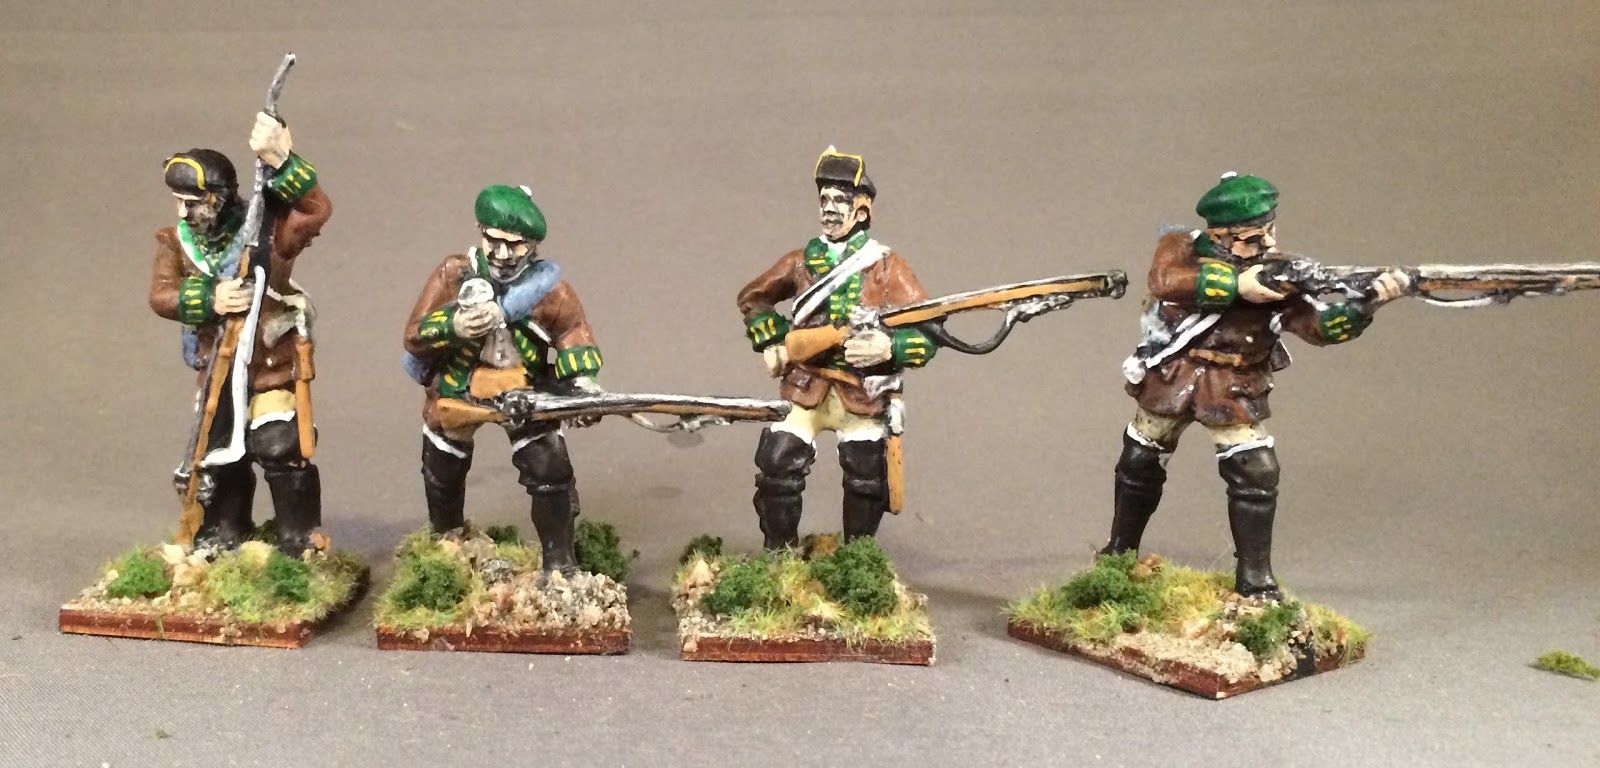 Bob's Miniature Wargaming Blog 1/32scale plastic AWI troops